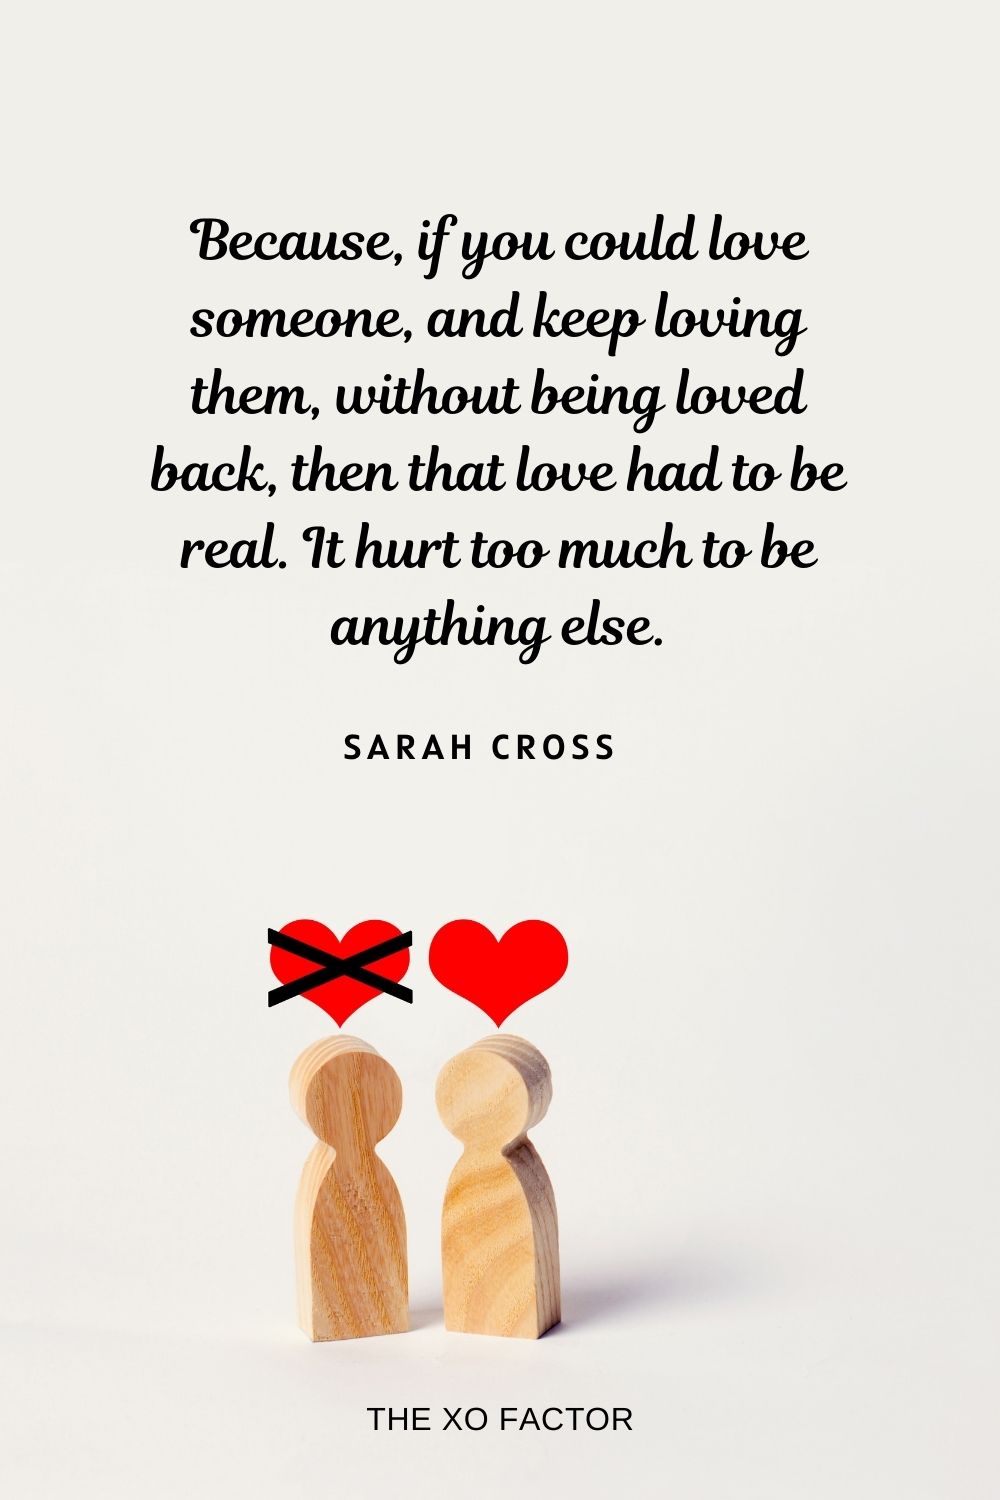 unrequited love quotes Because, if you could love someone, and keep loving them, without being loved back, then that love had to be real. It hurt too much to be anything else.  Sarah Cross